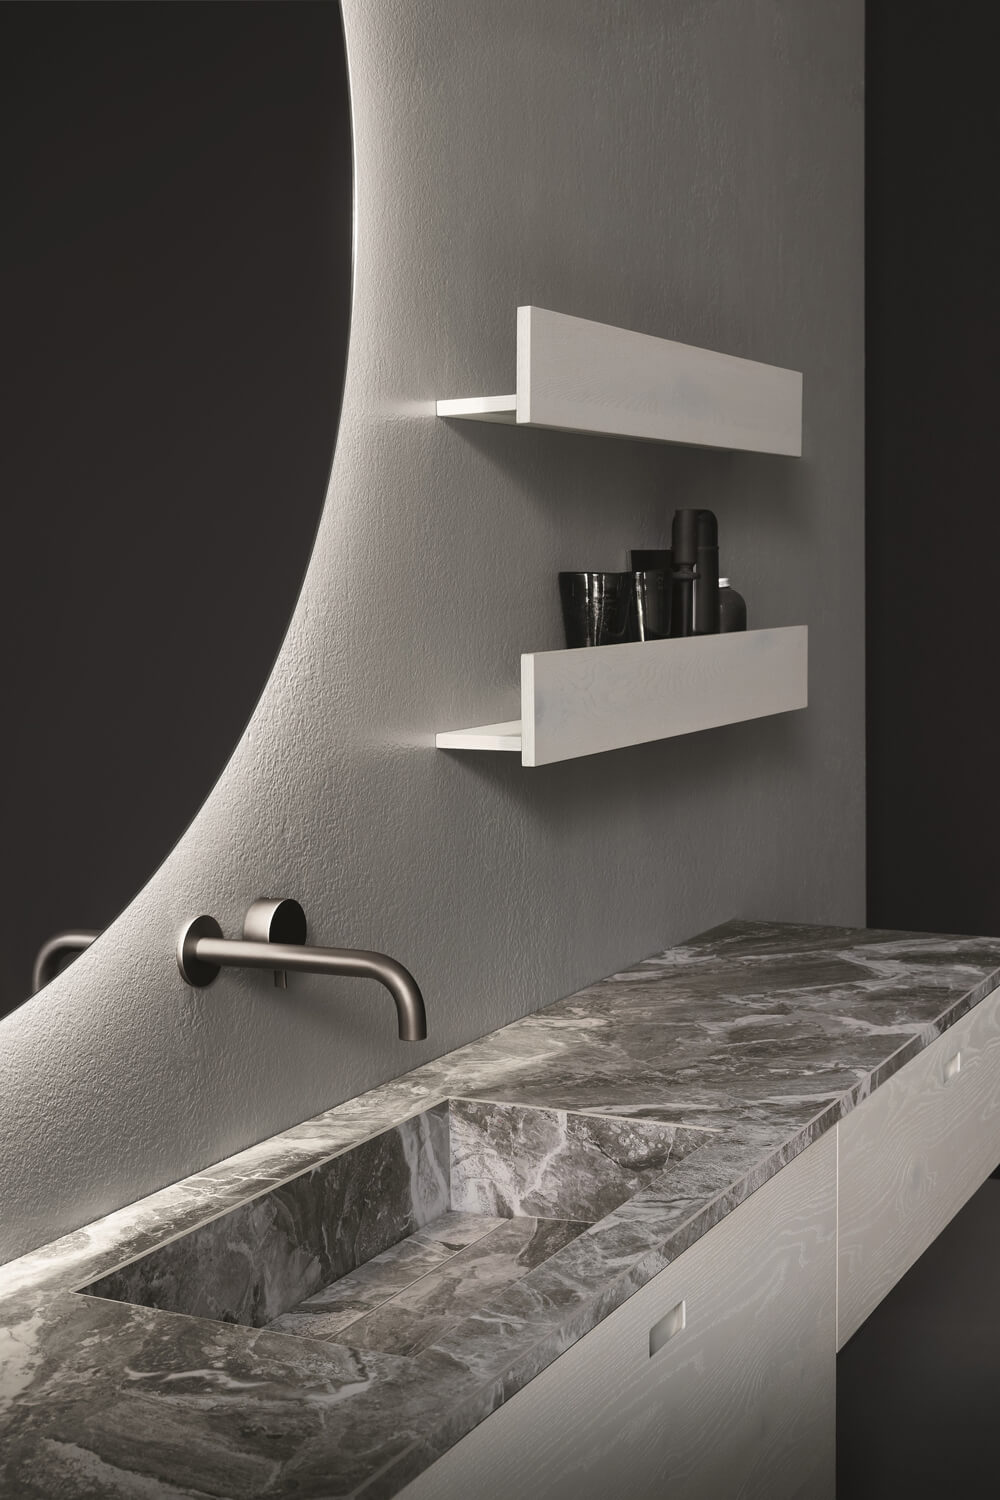 The vanities can be paired with open shelves in matching finish.